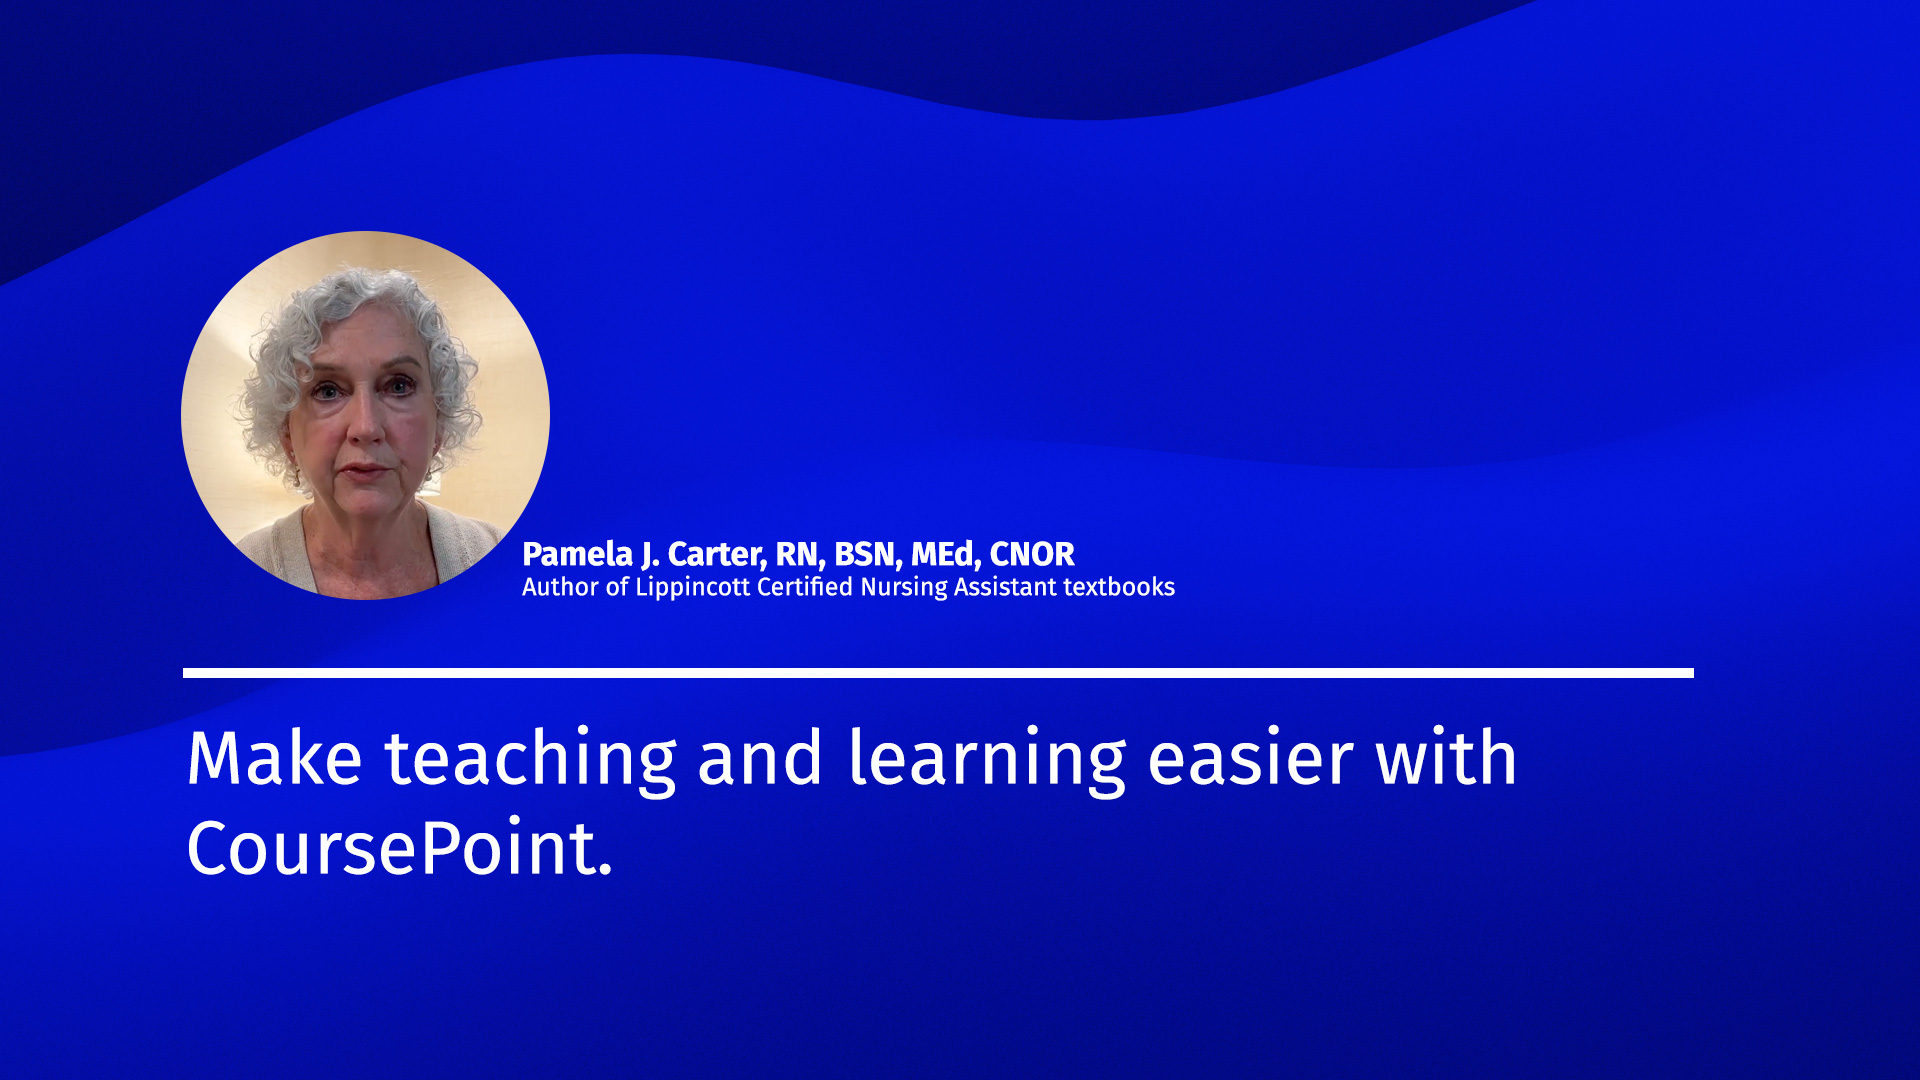 Pam Carter explains how to make teaching and learning easier with CoursePoint